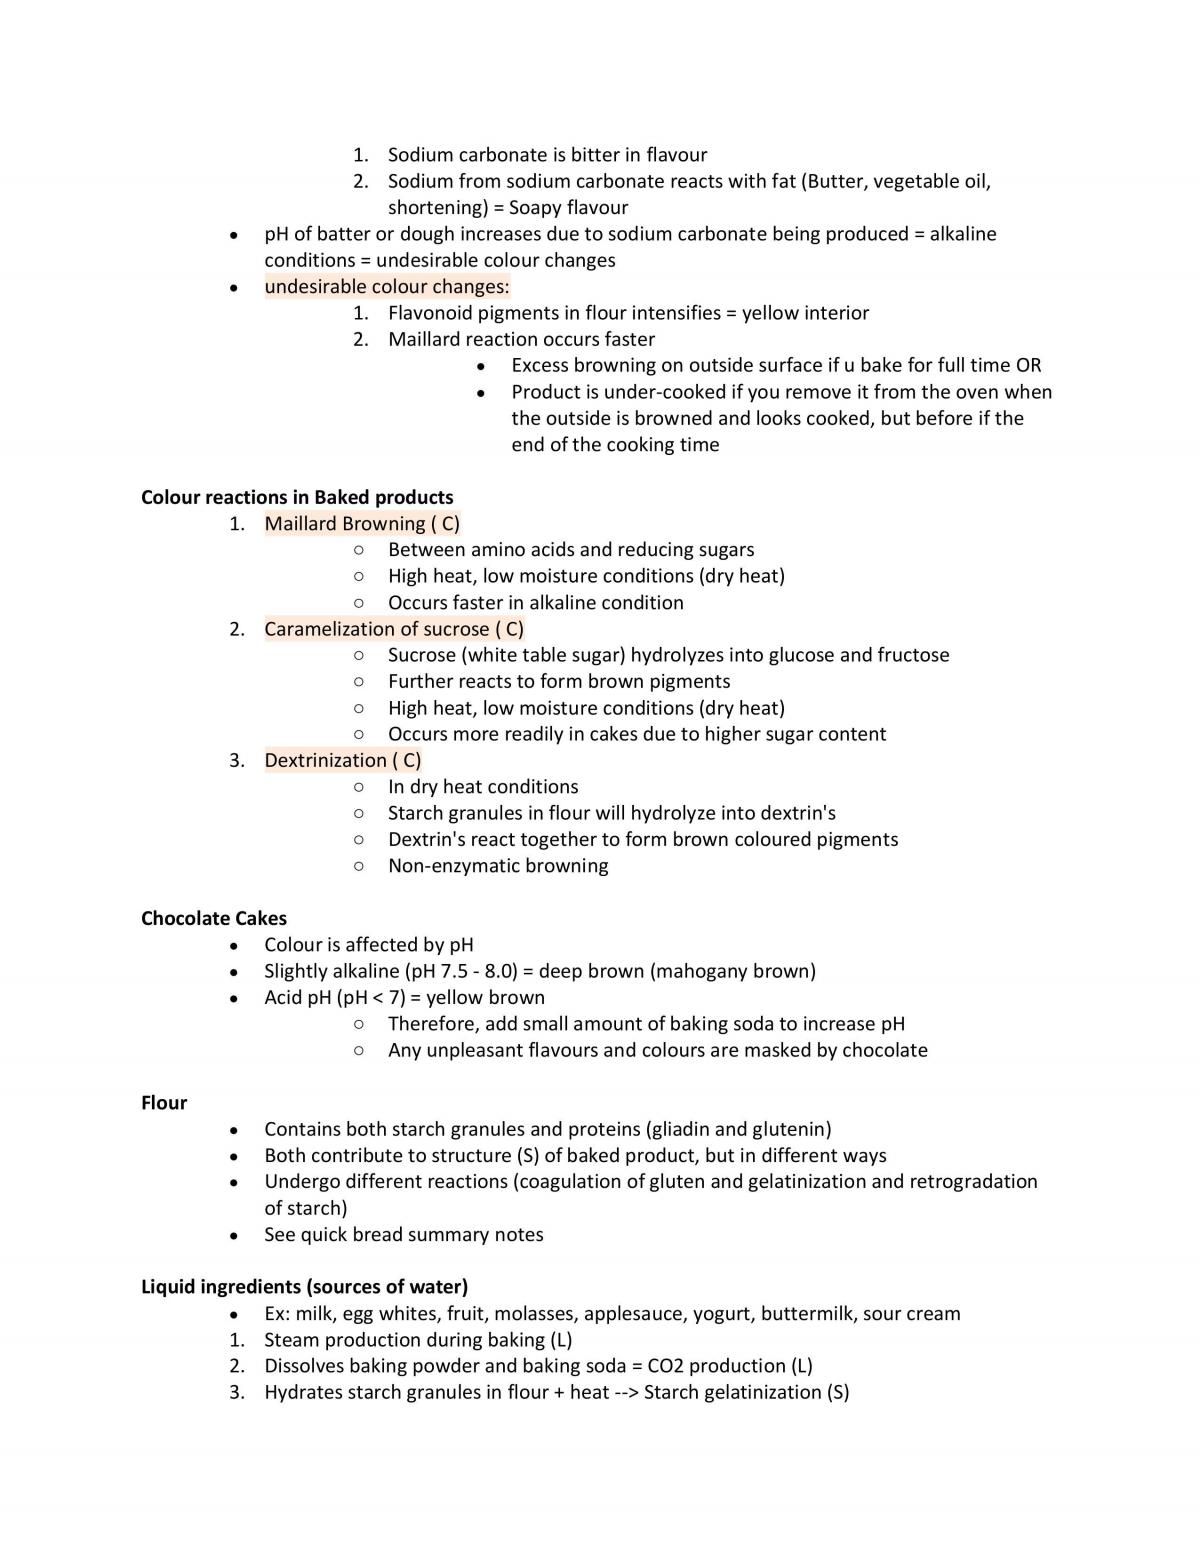 HTM 2700- Full study course notes - Page 25